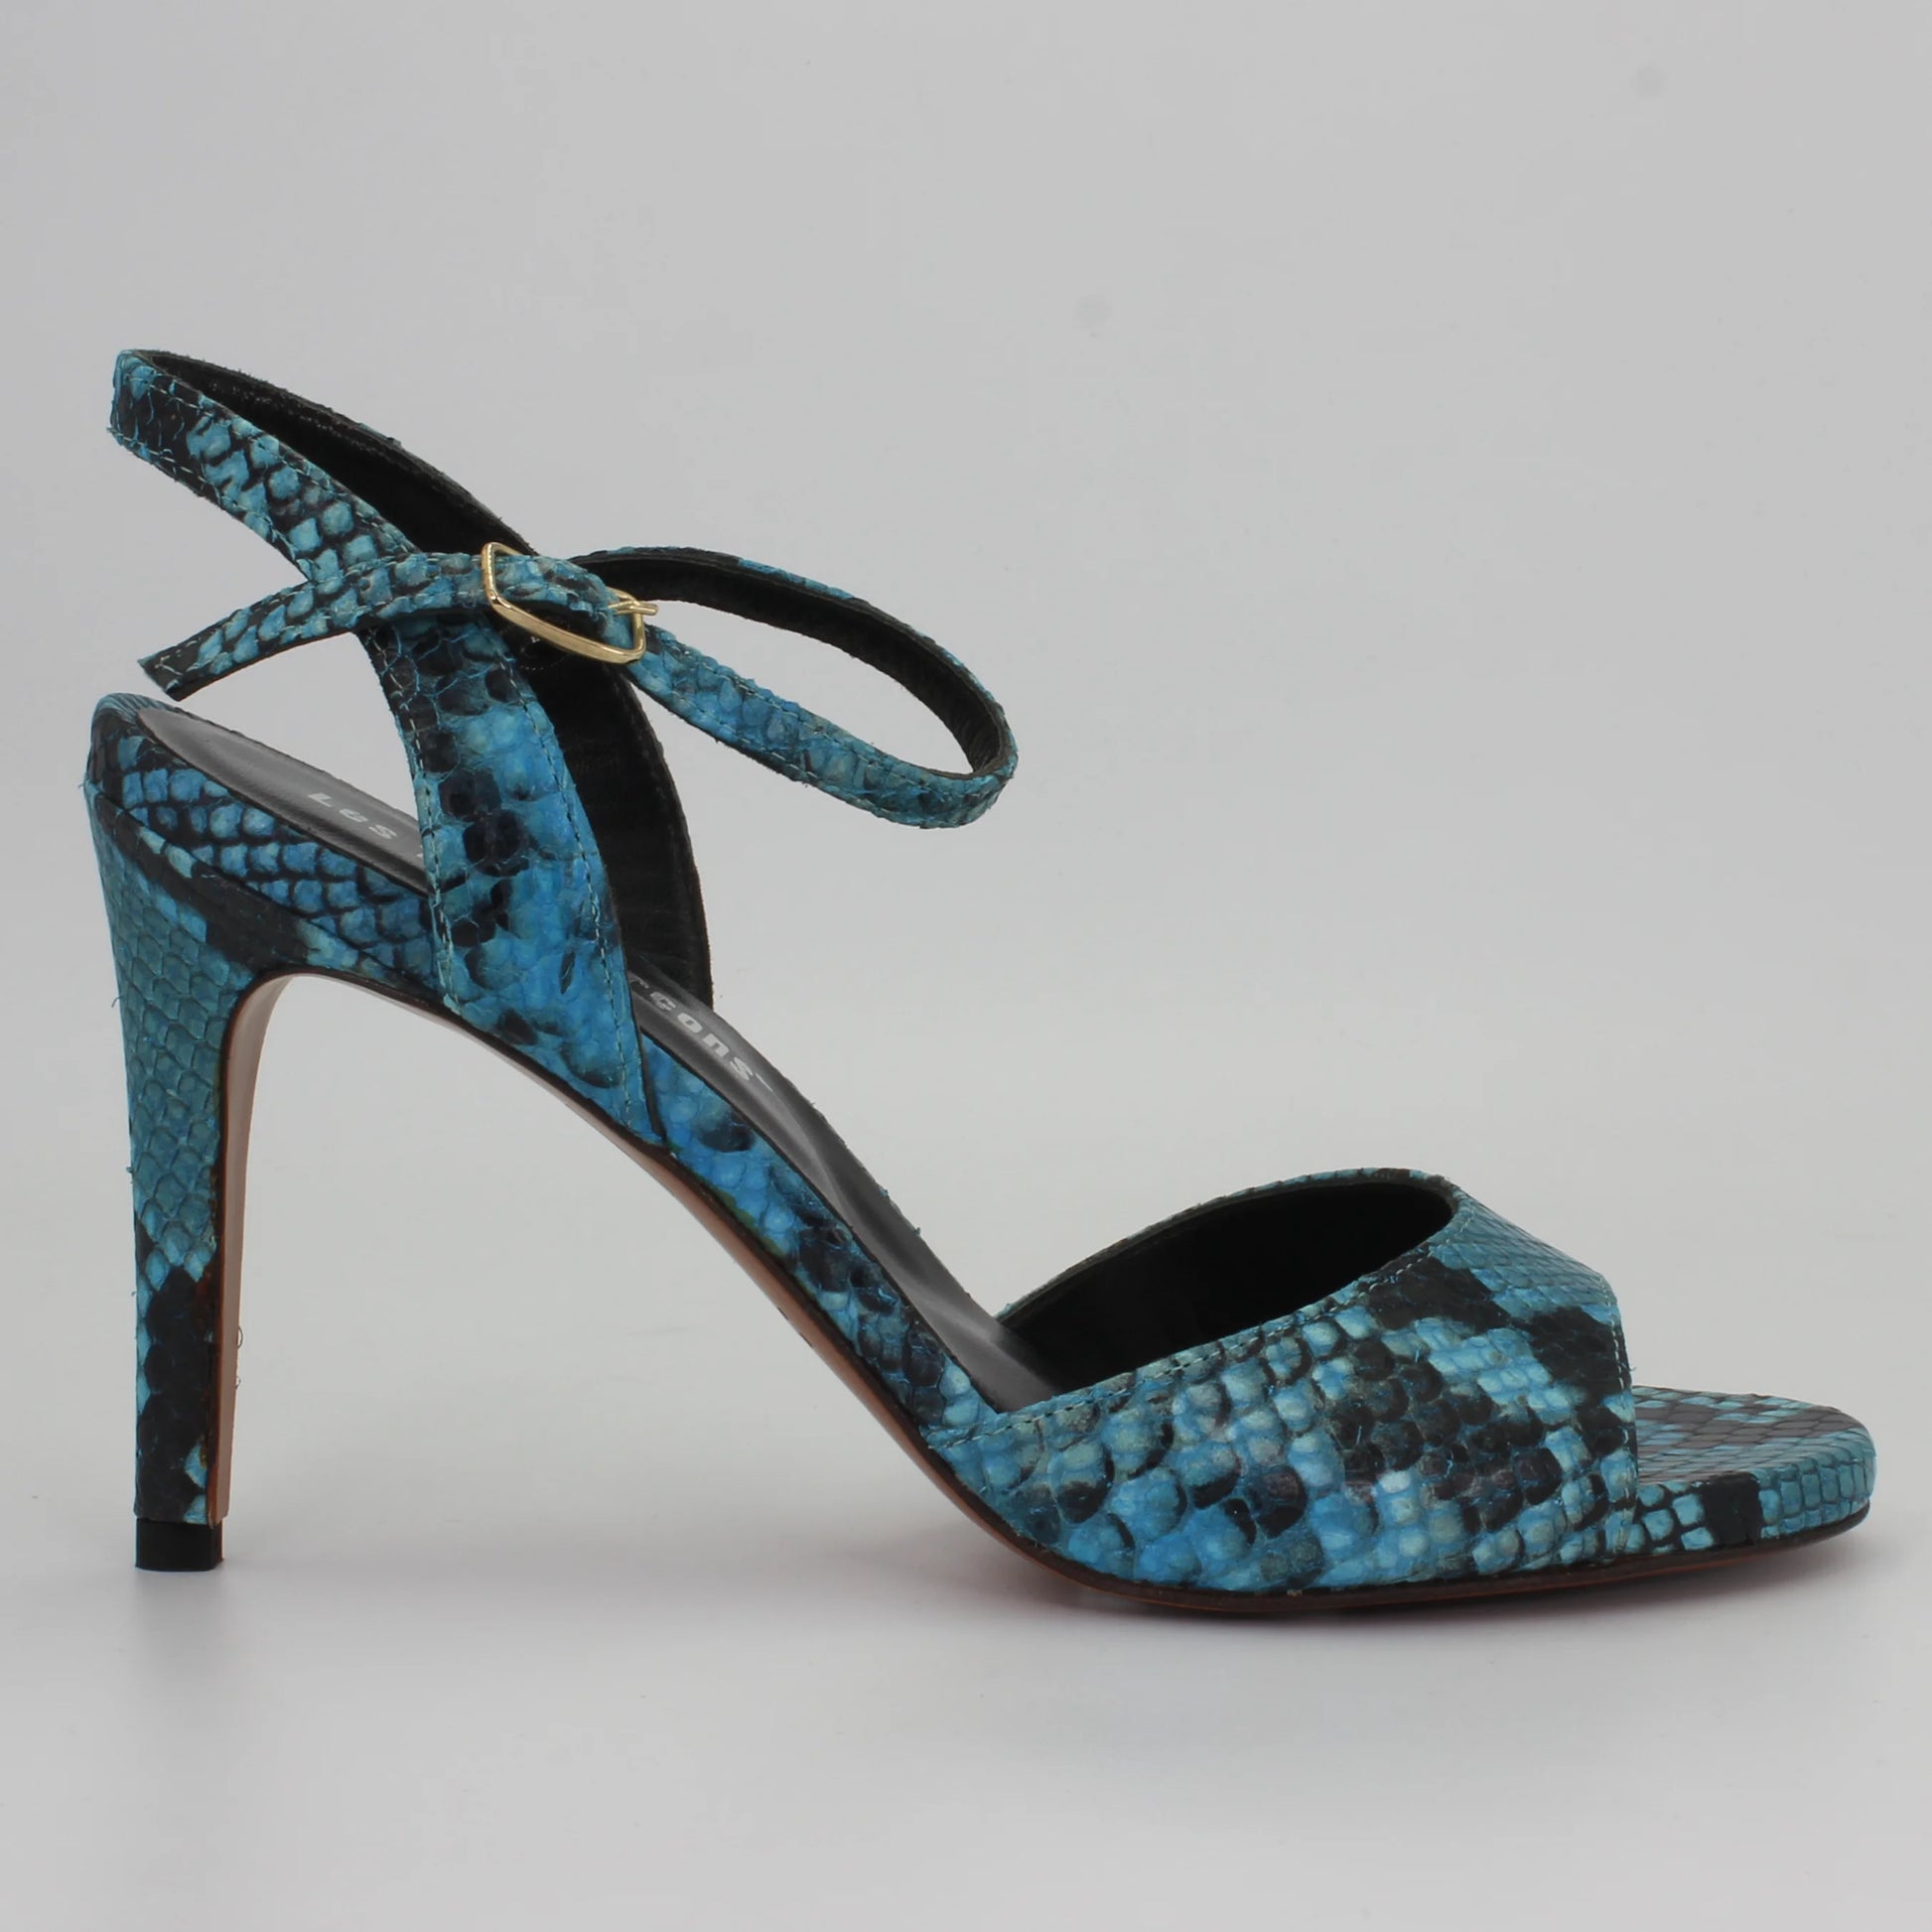 Shop Handmade Italian Leather high heel in blue python (LA59300) or browse our range of hand-made Italian shoes in leather or suede in-store at Aliverti Cape Town, or shop online. We deliver in South Africa & offer multiple payment plans as well as accept multiple safe & secure payment methods.